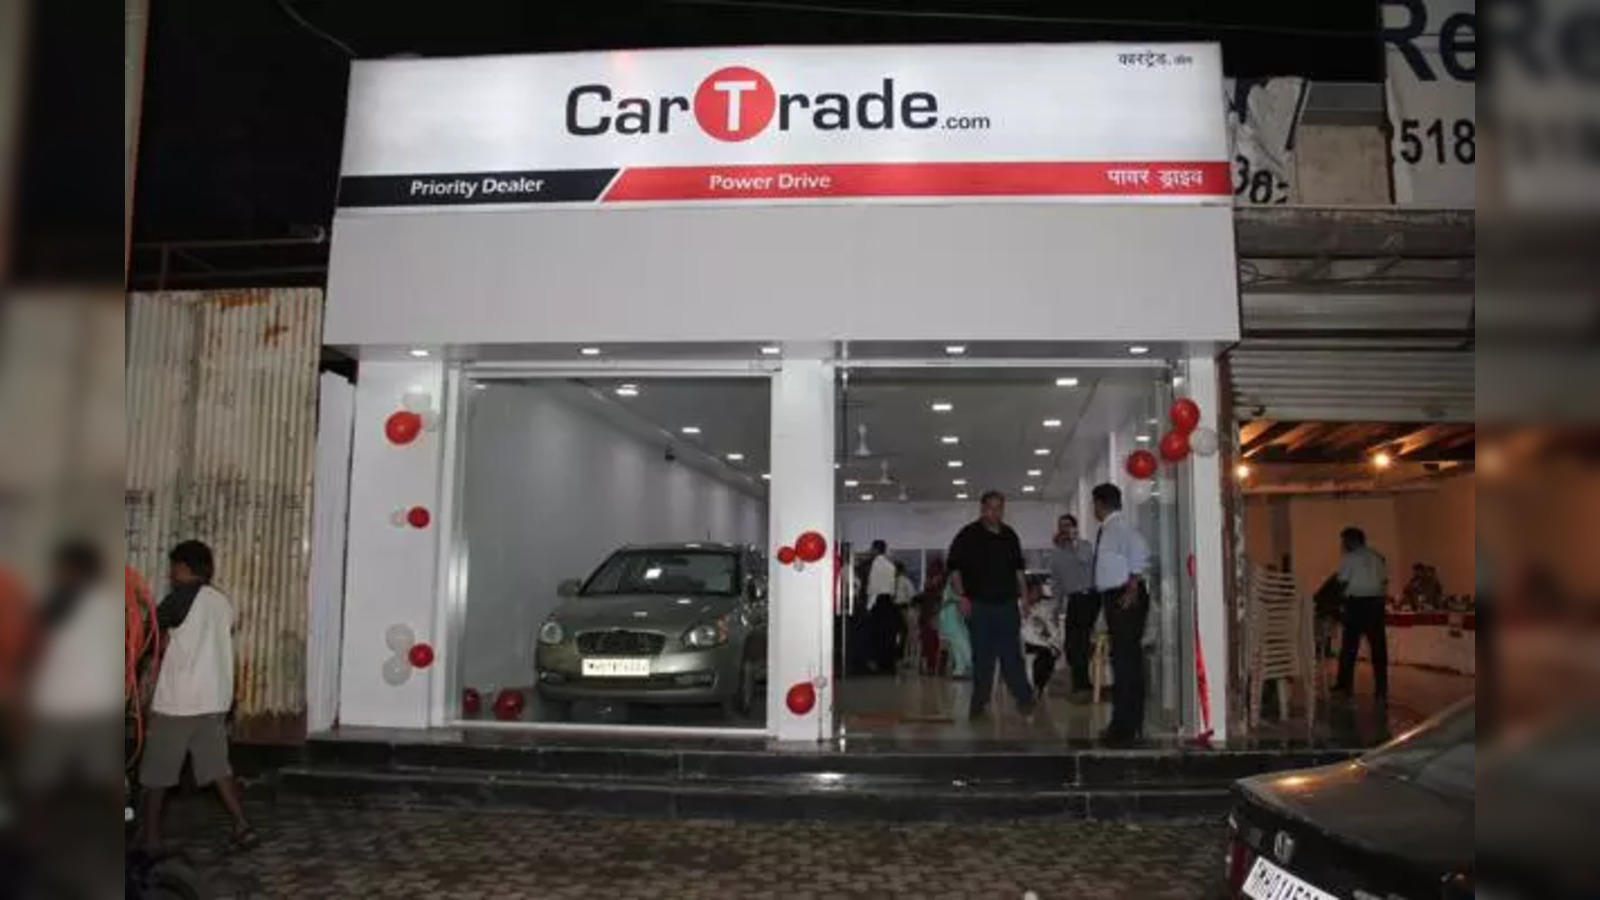 OLX Autos unveils a new product platform for pre-owned car trade in India